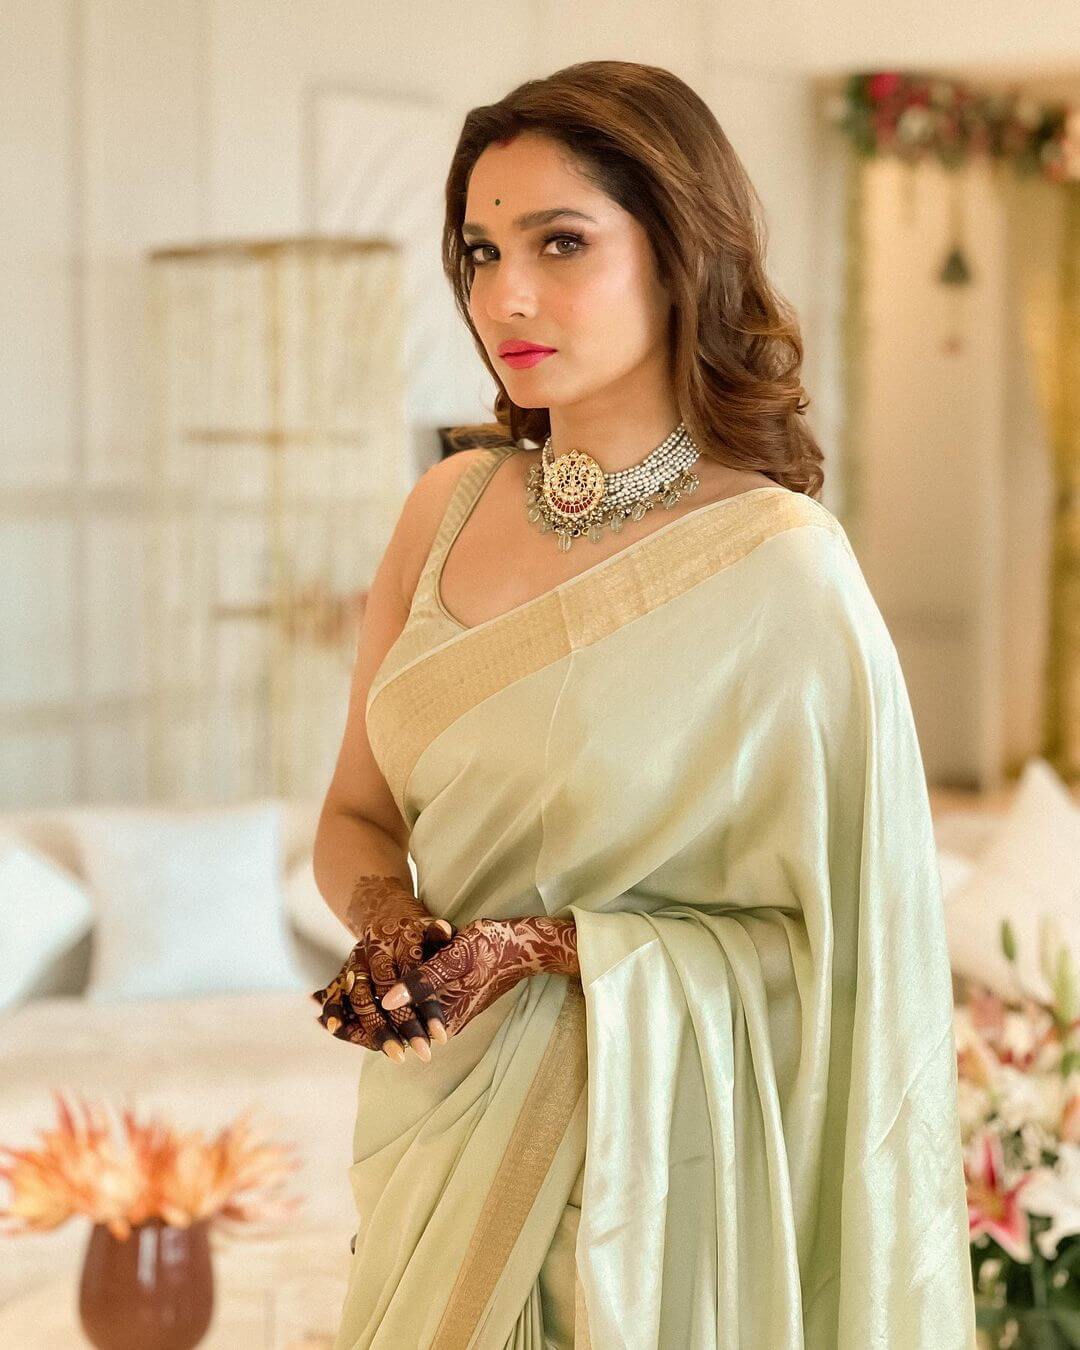 Ankita Lokhande Chic & Classy Look In Off White Saree With Sleeveless Blouse